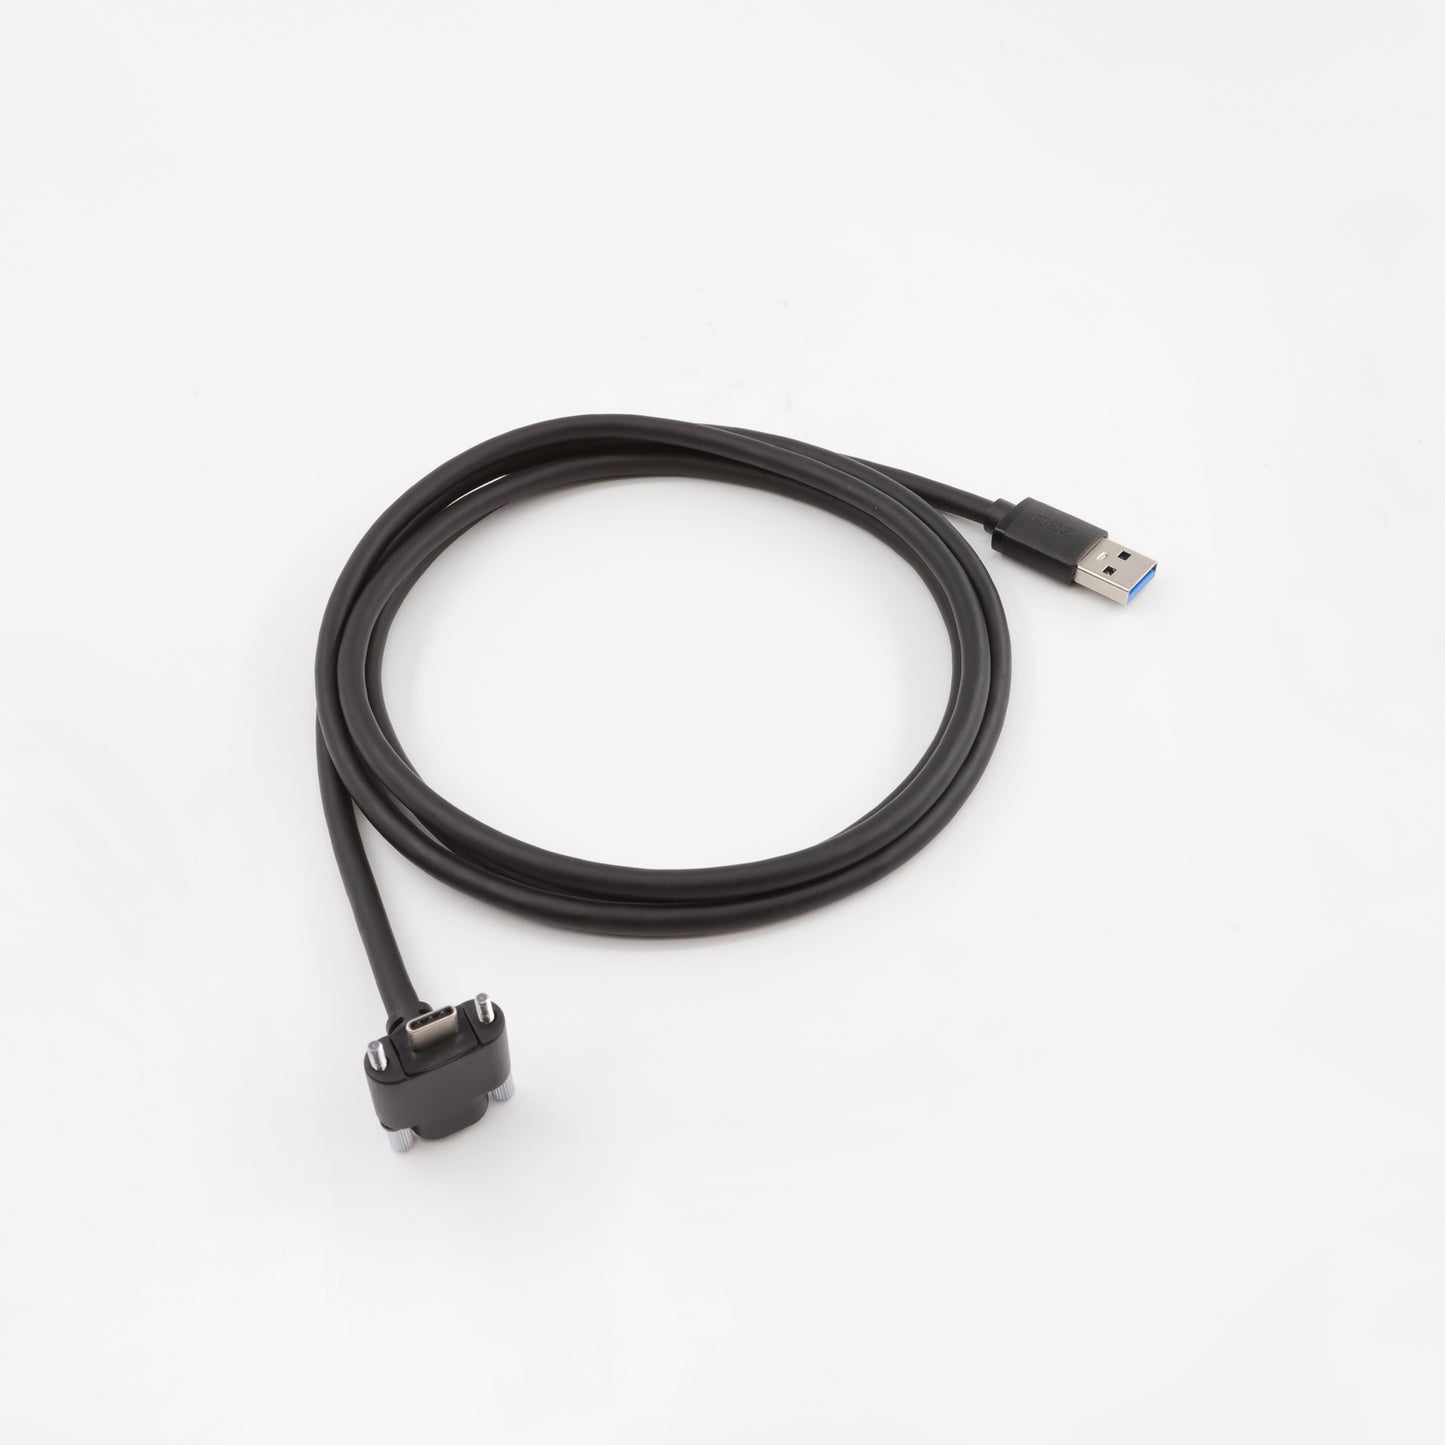 USB 3.0 Type C Right Angle Dual Screw Locking Cable - 1.5m